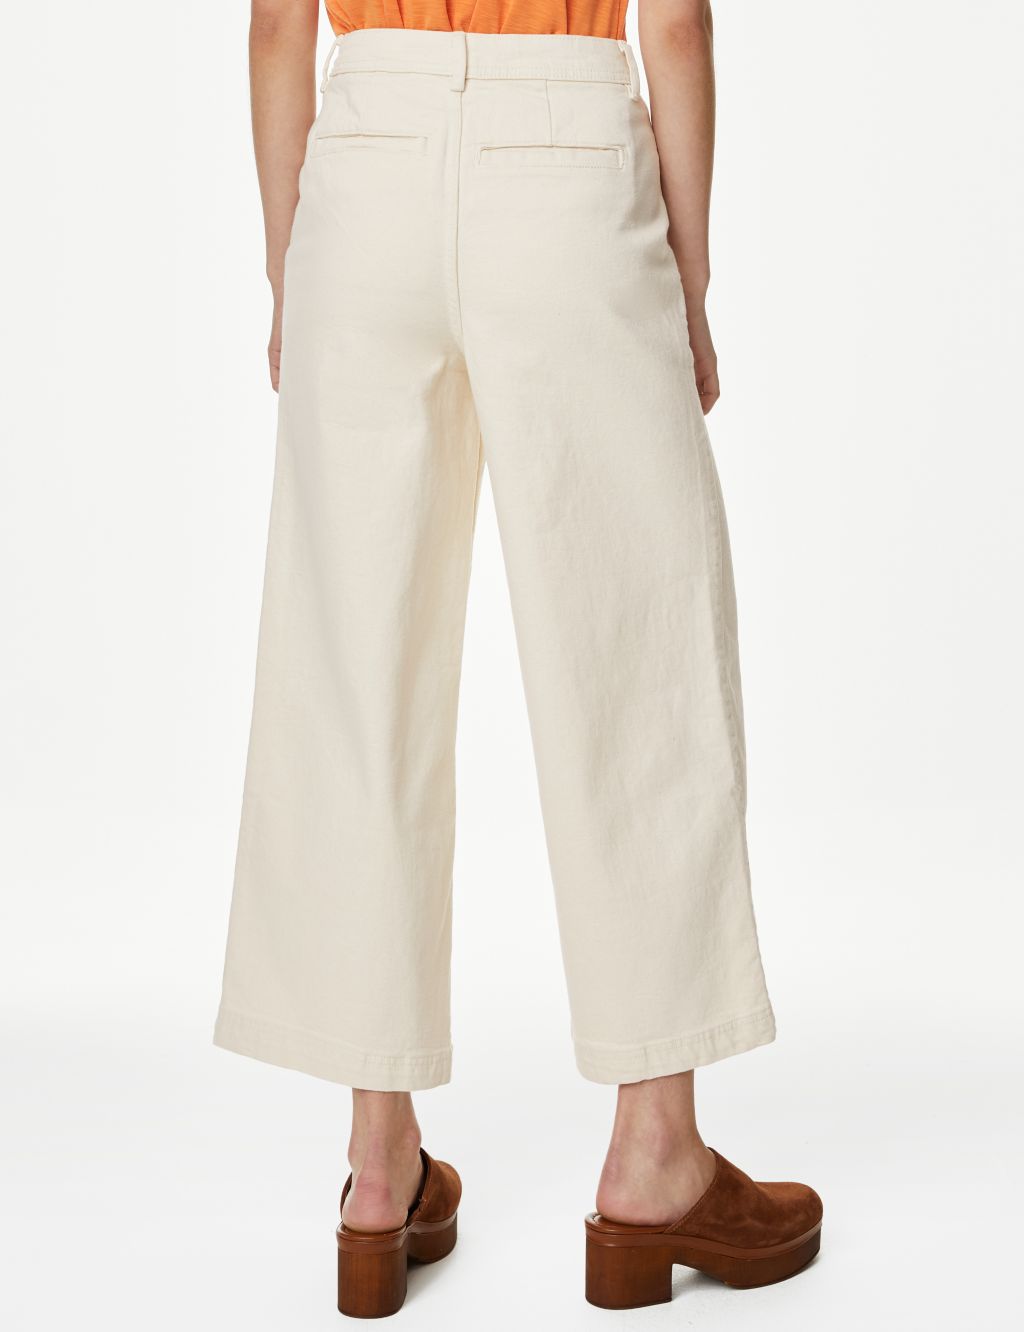 High Waisted Wide Leg Cropped Jeans image 4